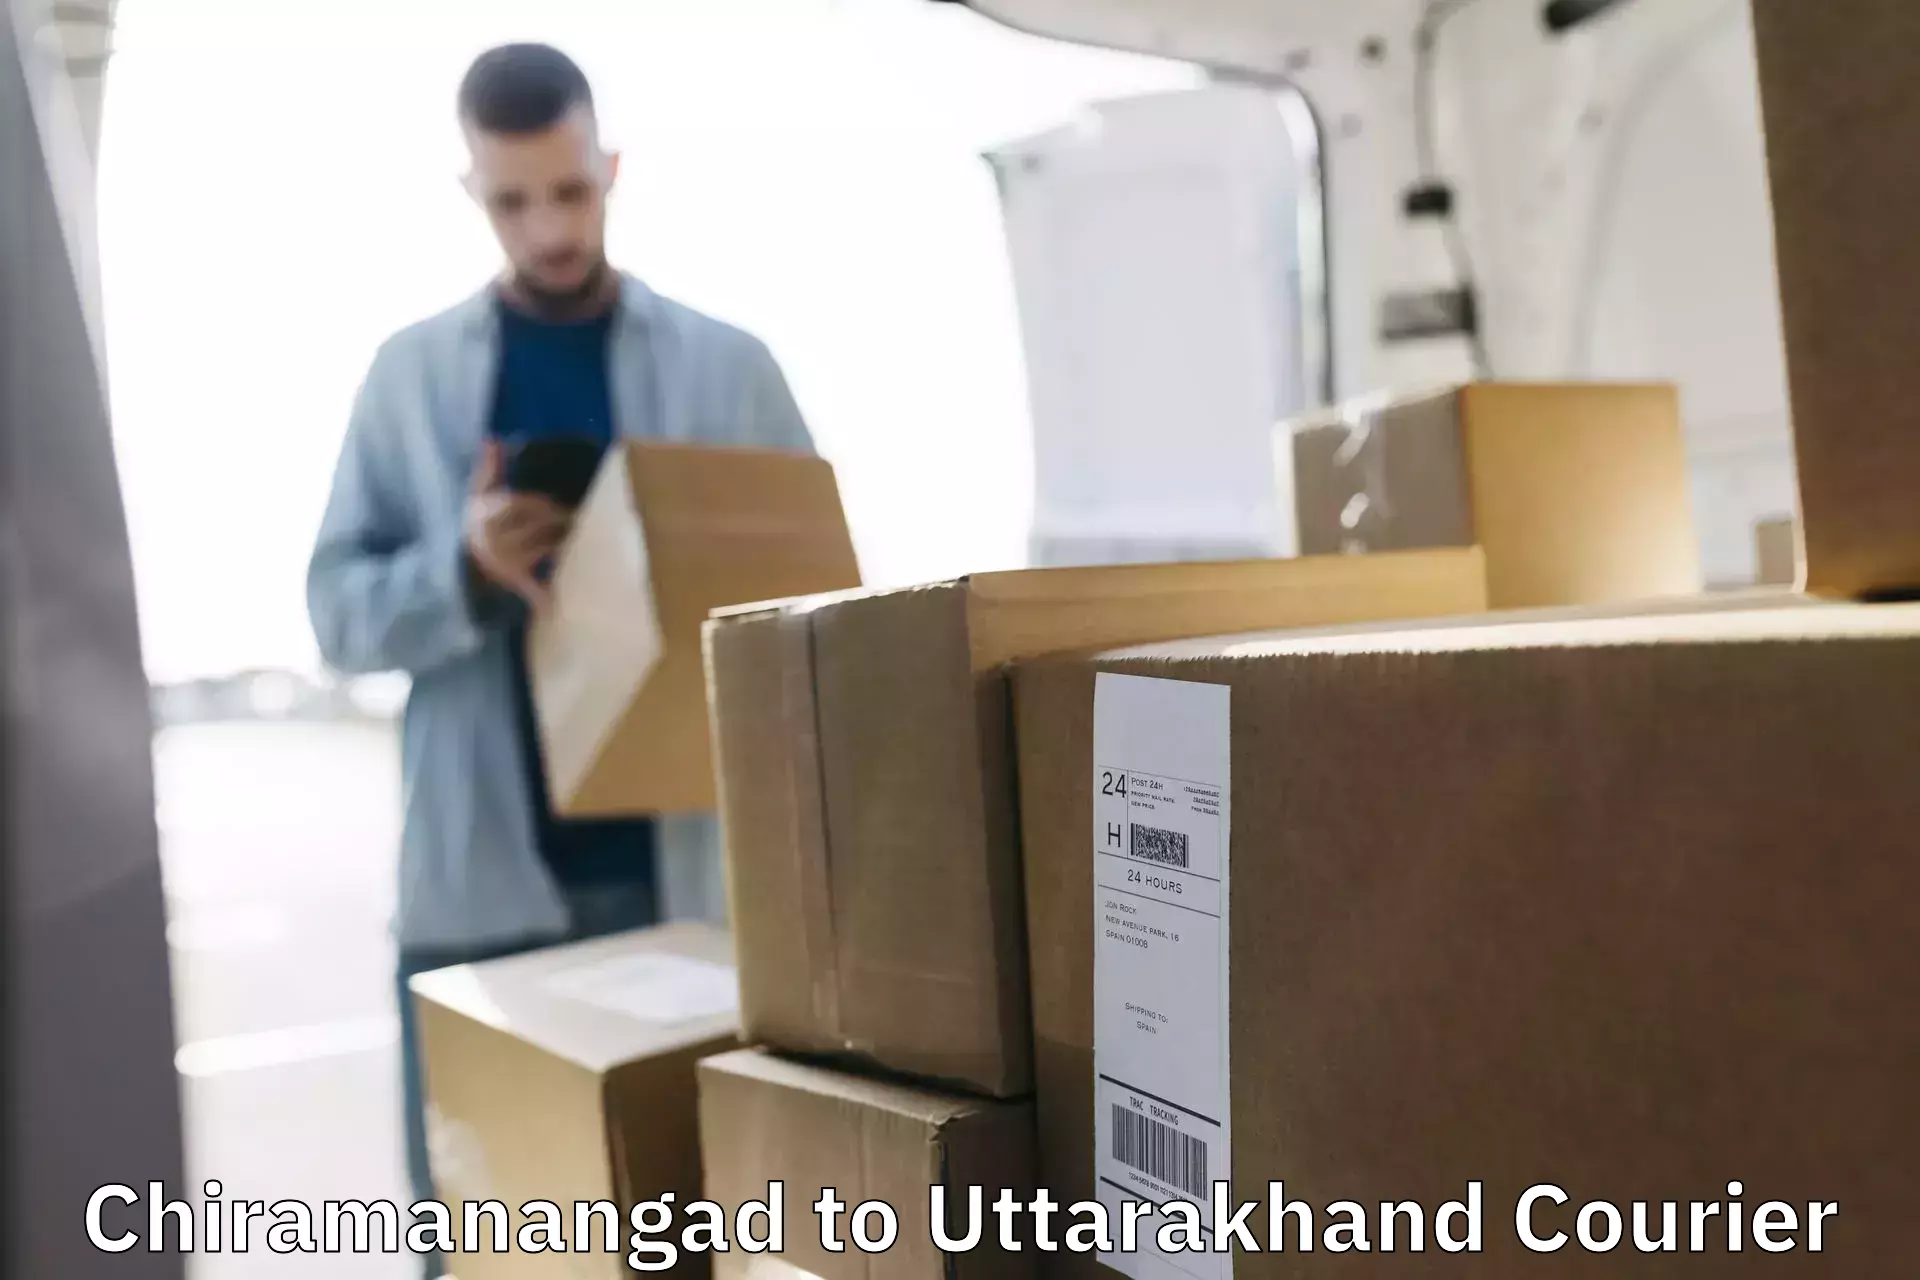 High-priority parcel service Chiramanangad to Lohaghat